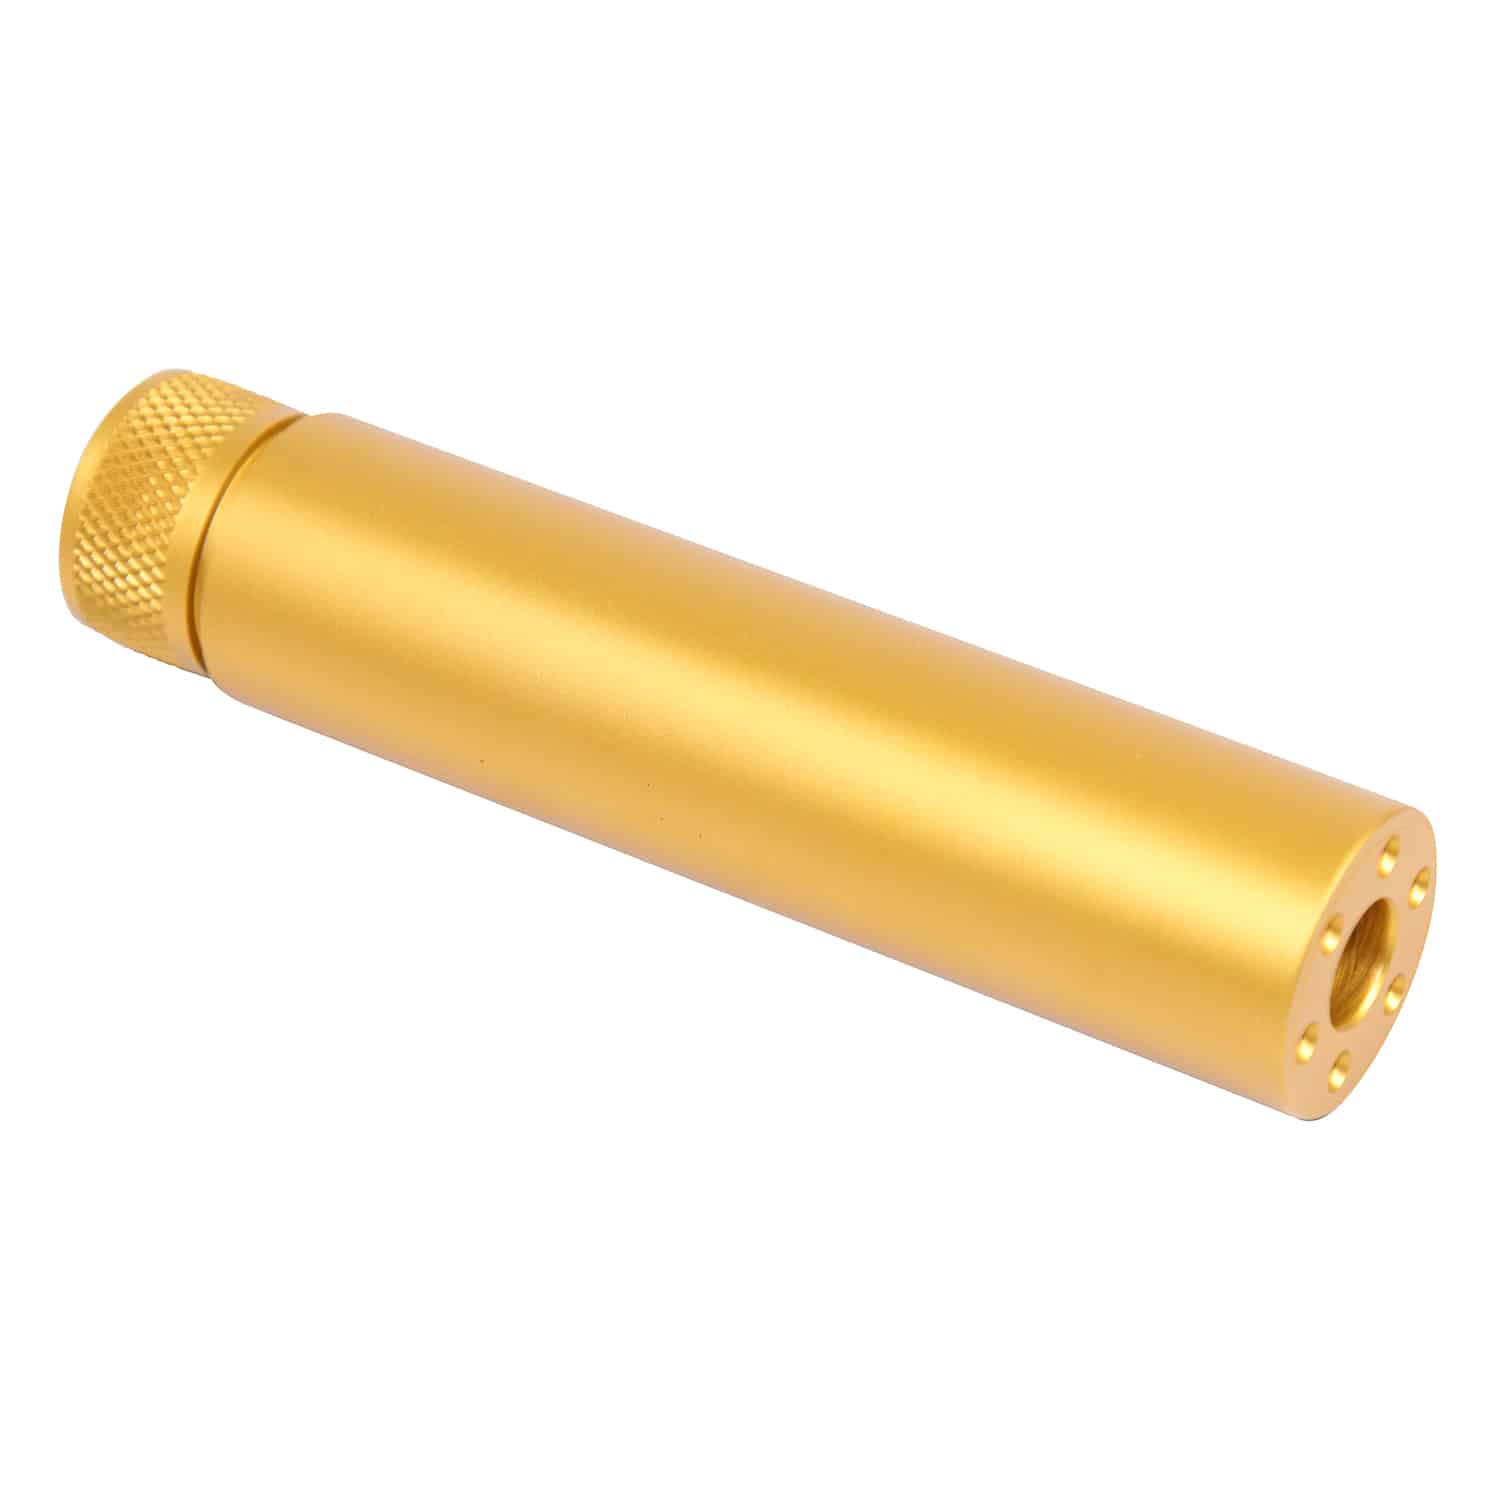 AR-15 5.5'' Fake Suppressor Extension in Anodized Gold